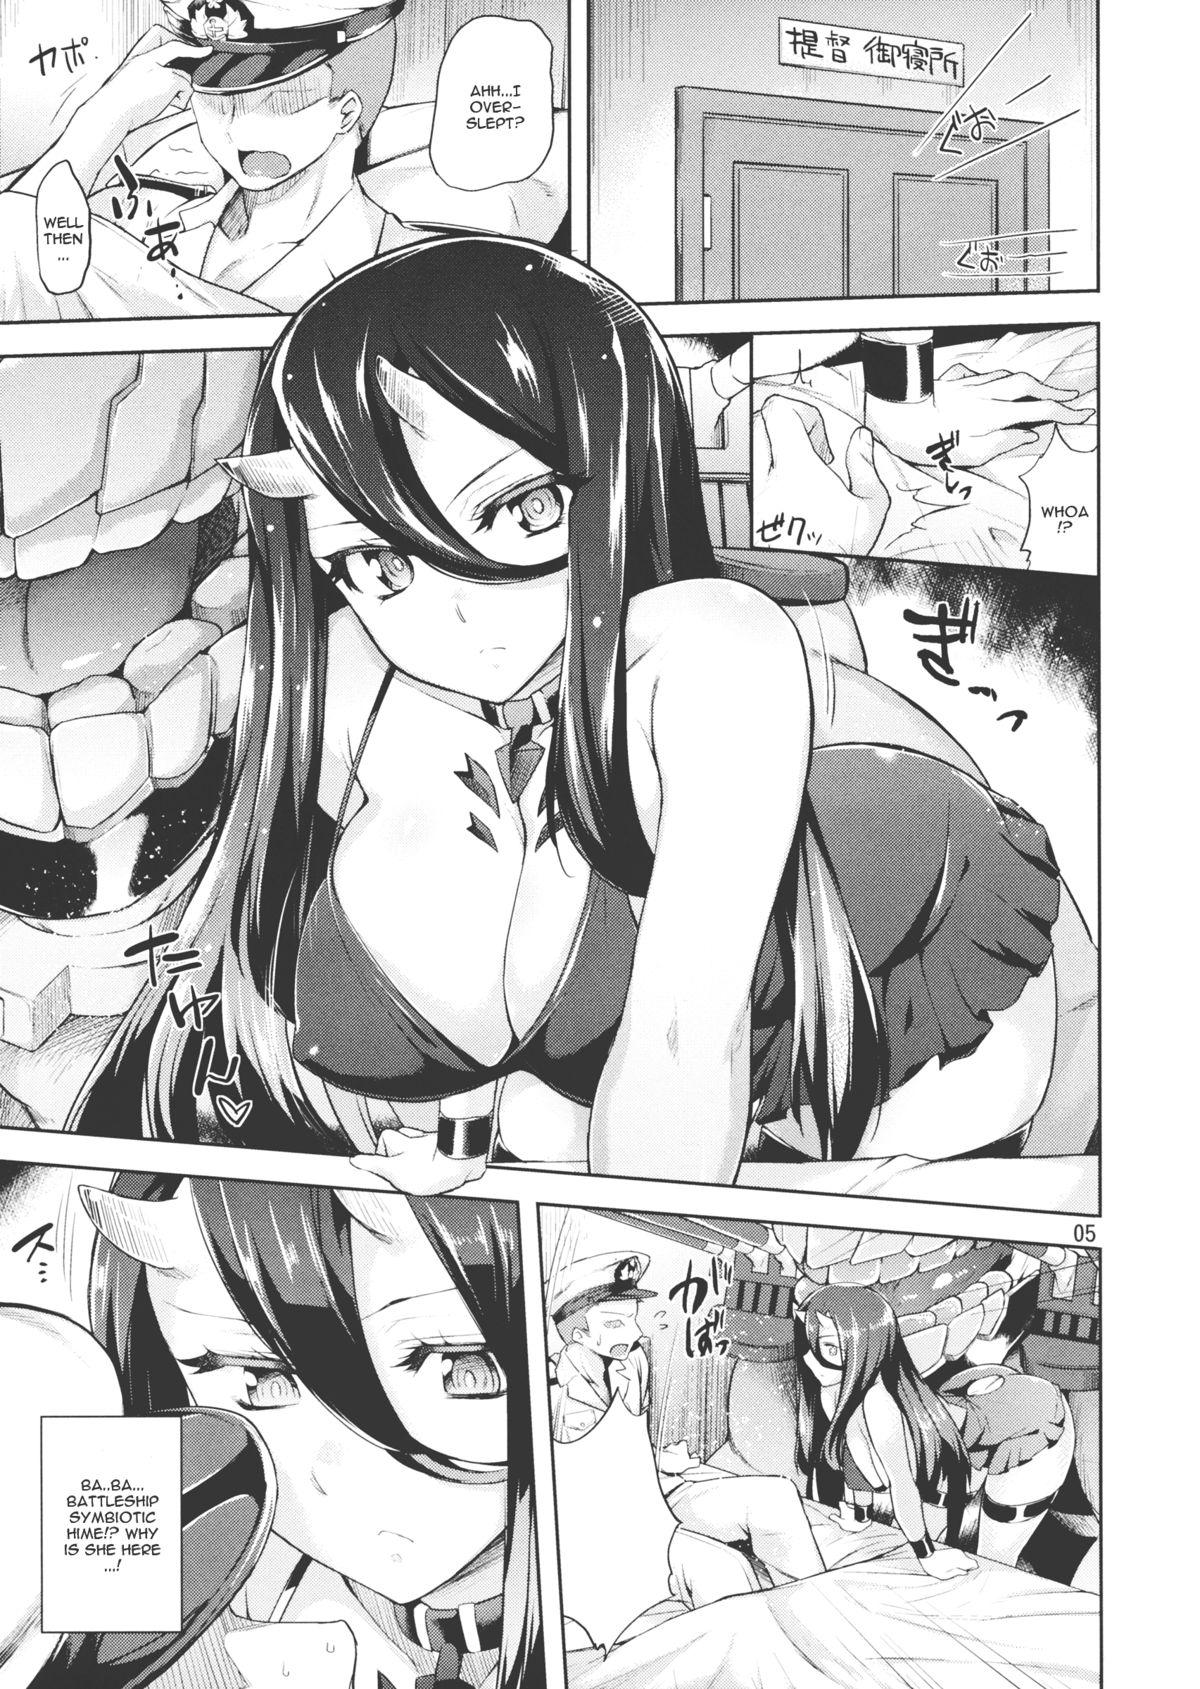 Bus Amicable Unseen Entity - Kantai collection Amatures Gone Wild - Page 4